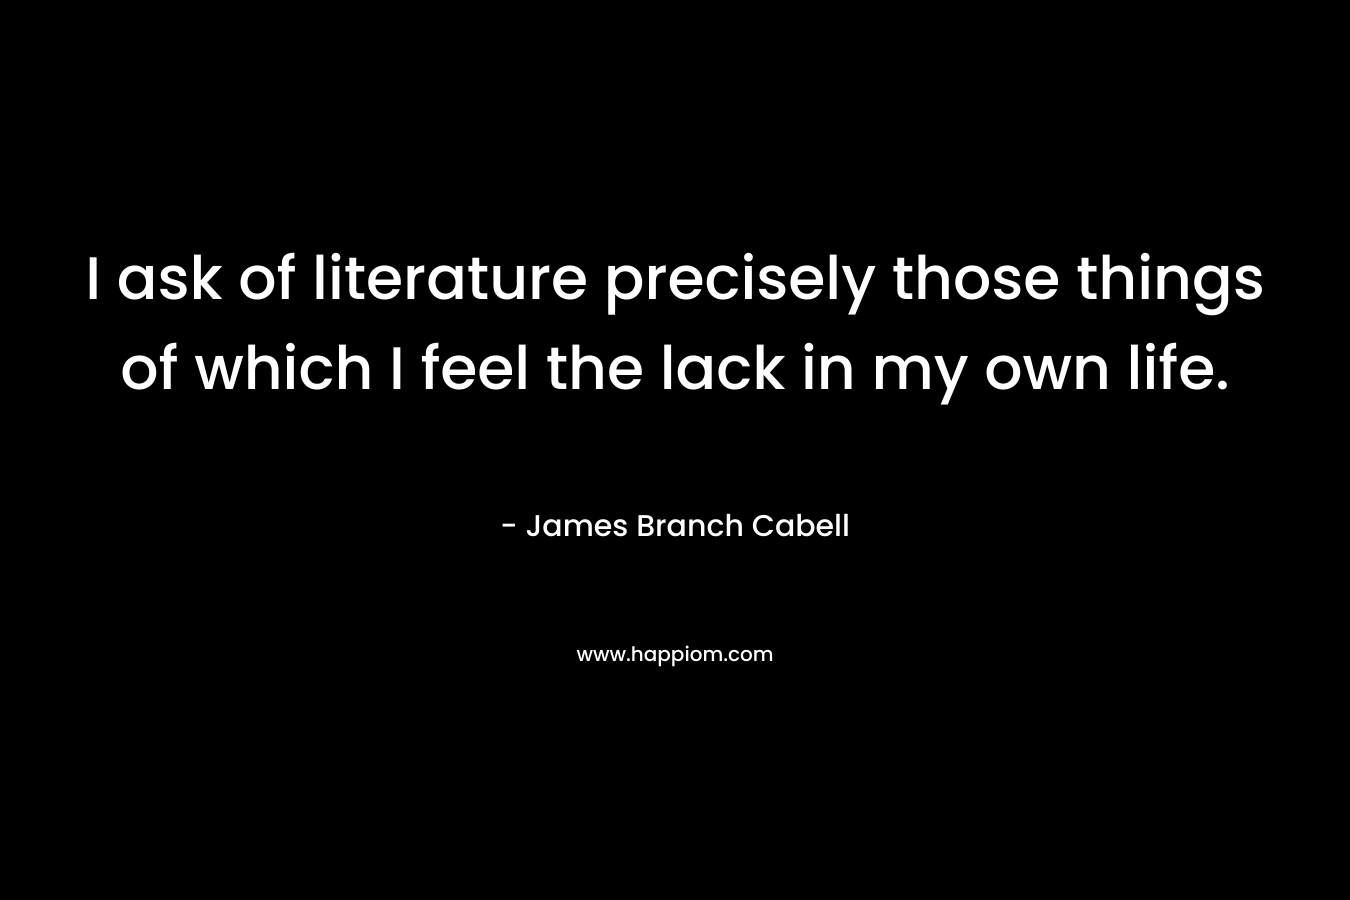 I ask of literature precisely those things of which I feel the lack in my own life. – James Branch Cabell